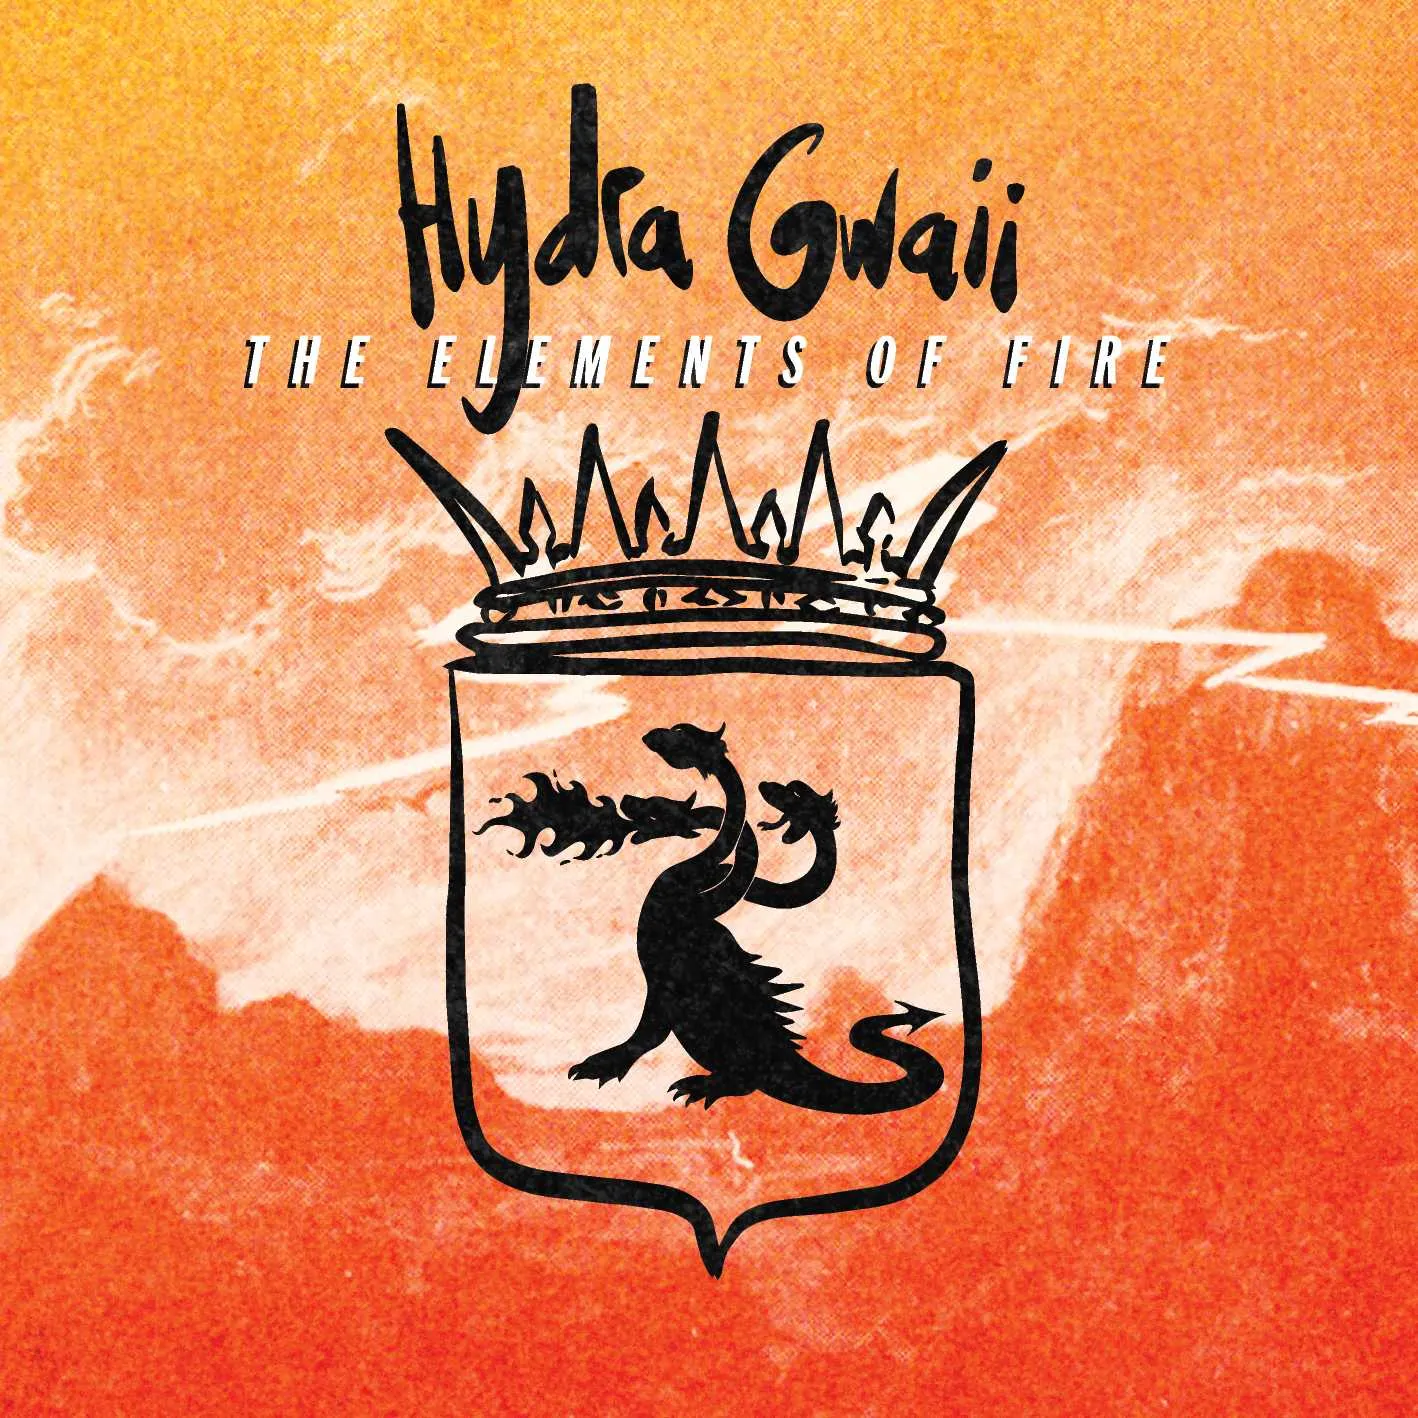 Album cover for “The Elements Of Fire” by Hydra Gwaii